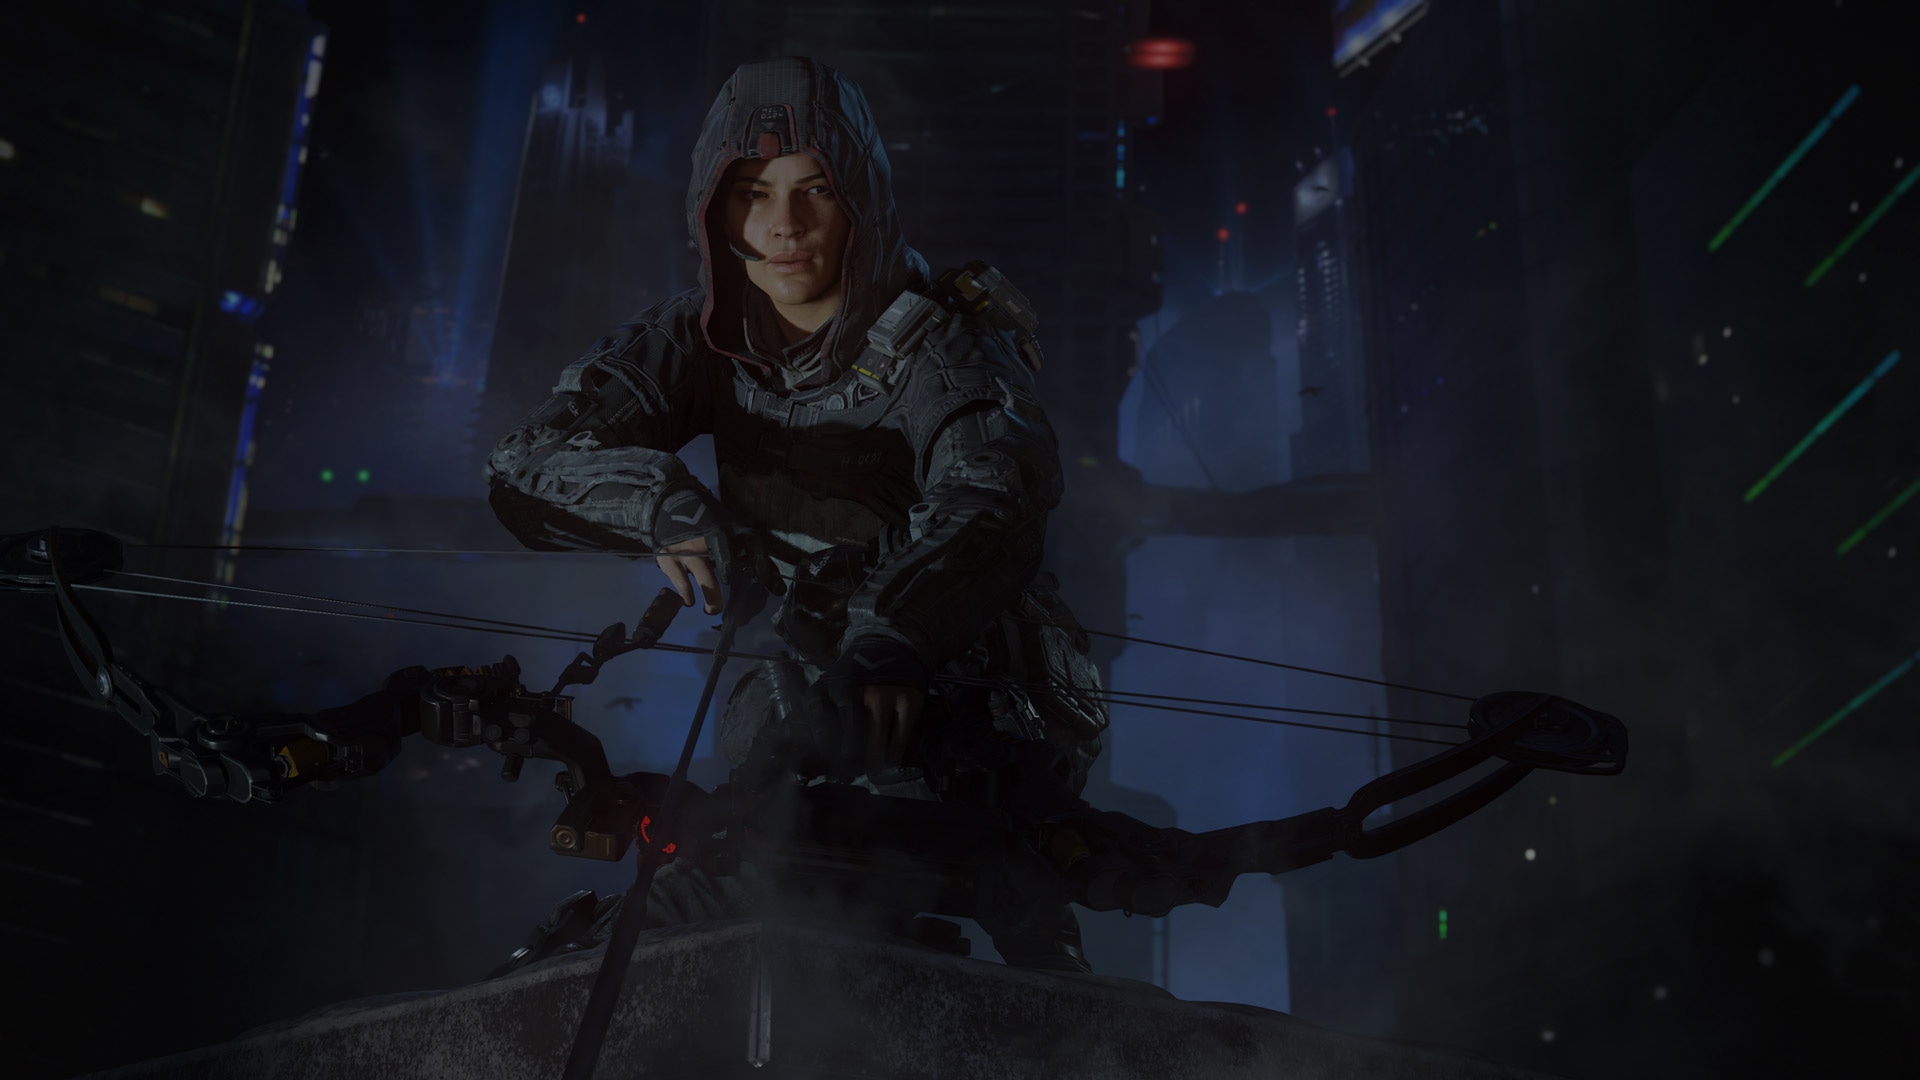 New hi res images for the 8 known Black Ops 3 Specialist